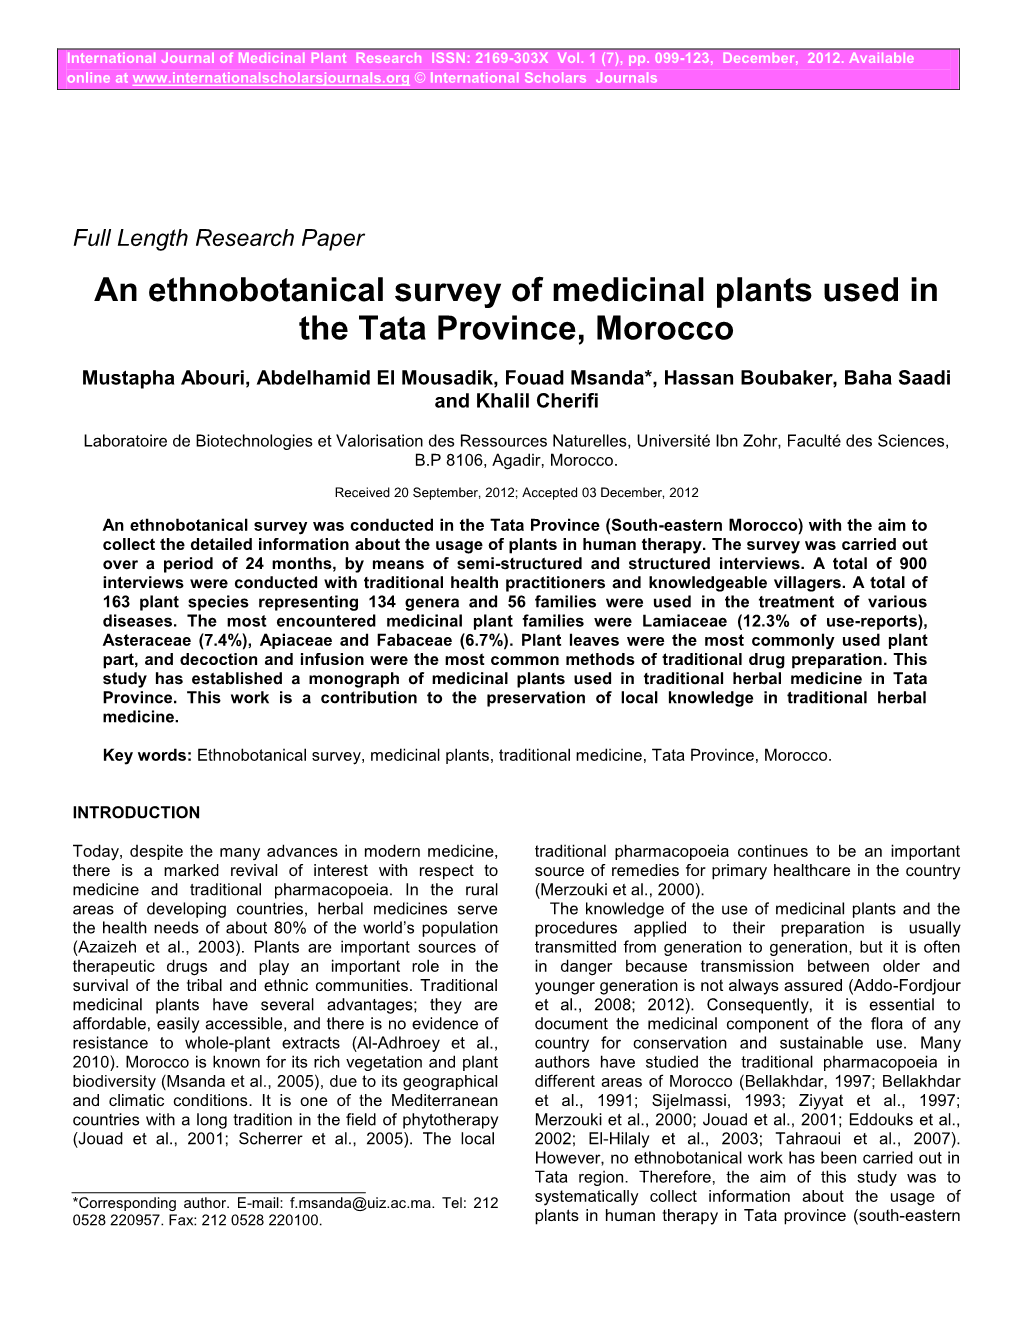 An Ethnobotanical Survey of Medicinal Plants Used in the Tata Province, Morocco